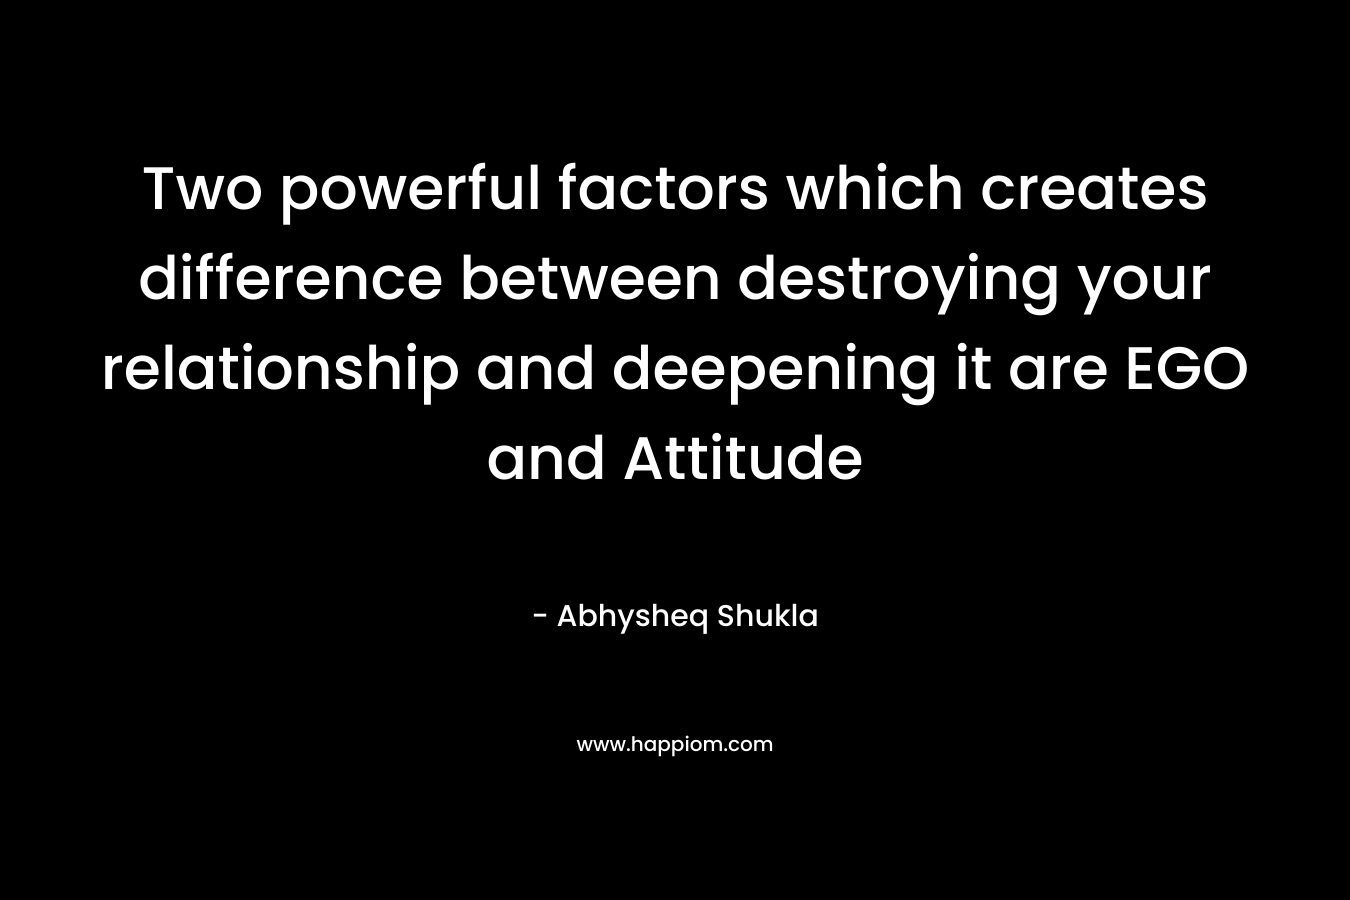 Two powerful factors which creates difference between destroying your relationship and deepening it are EGO and Attitude – Abhysheq Shukla